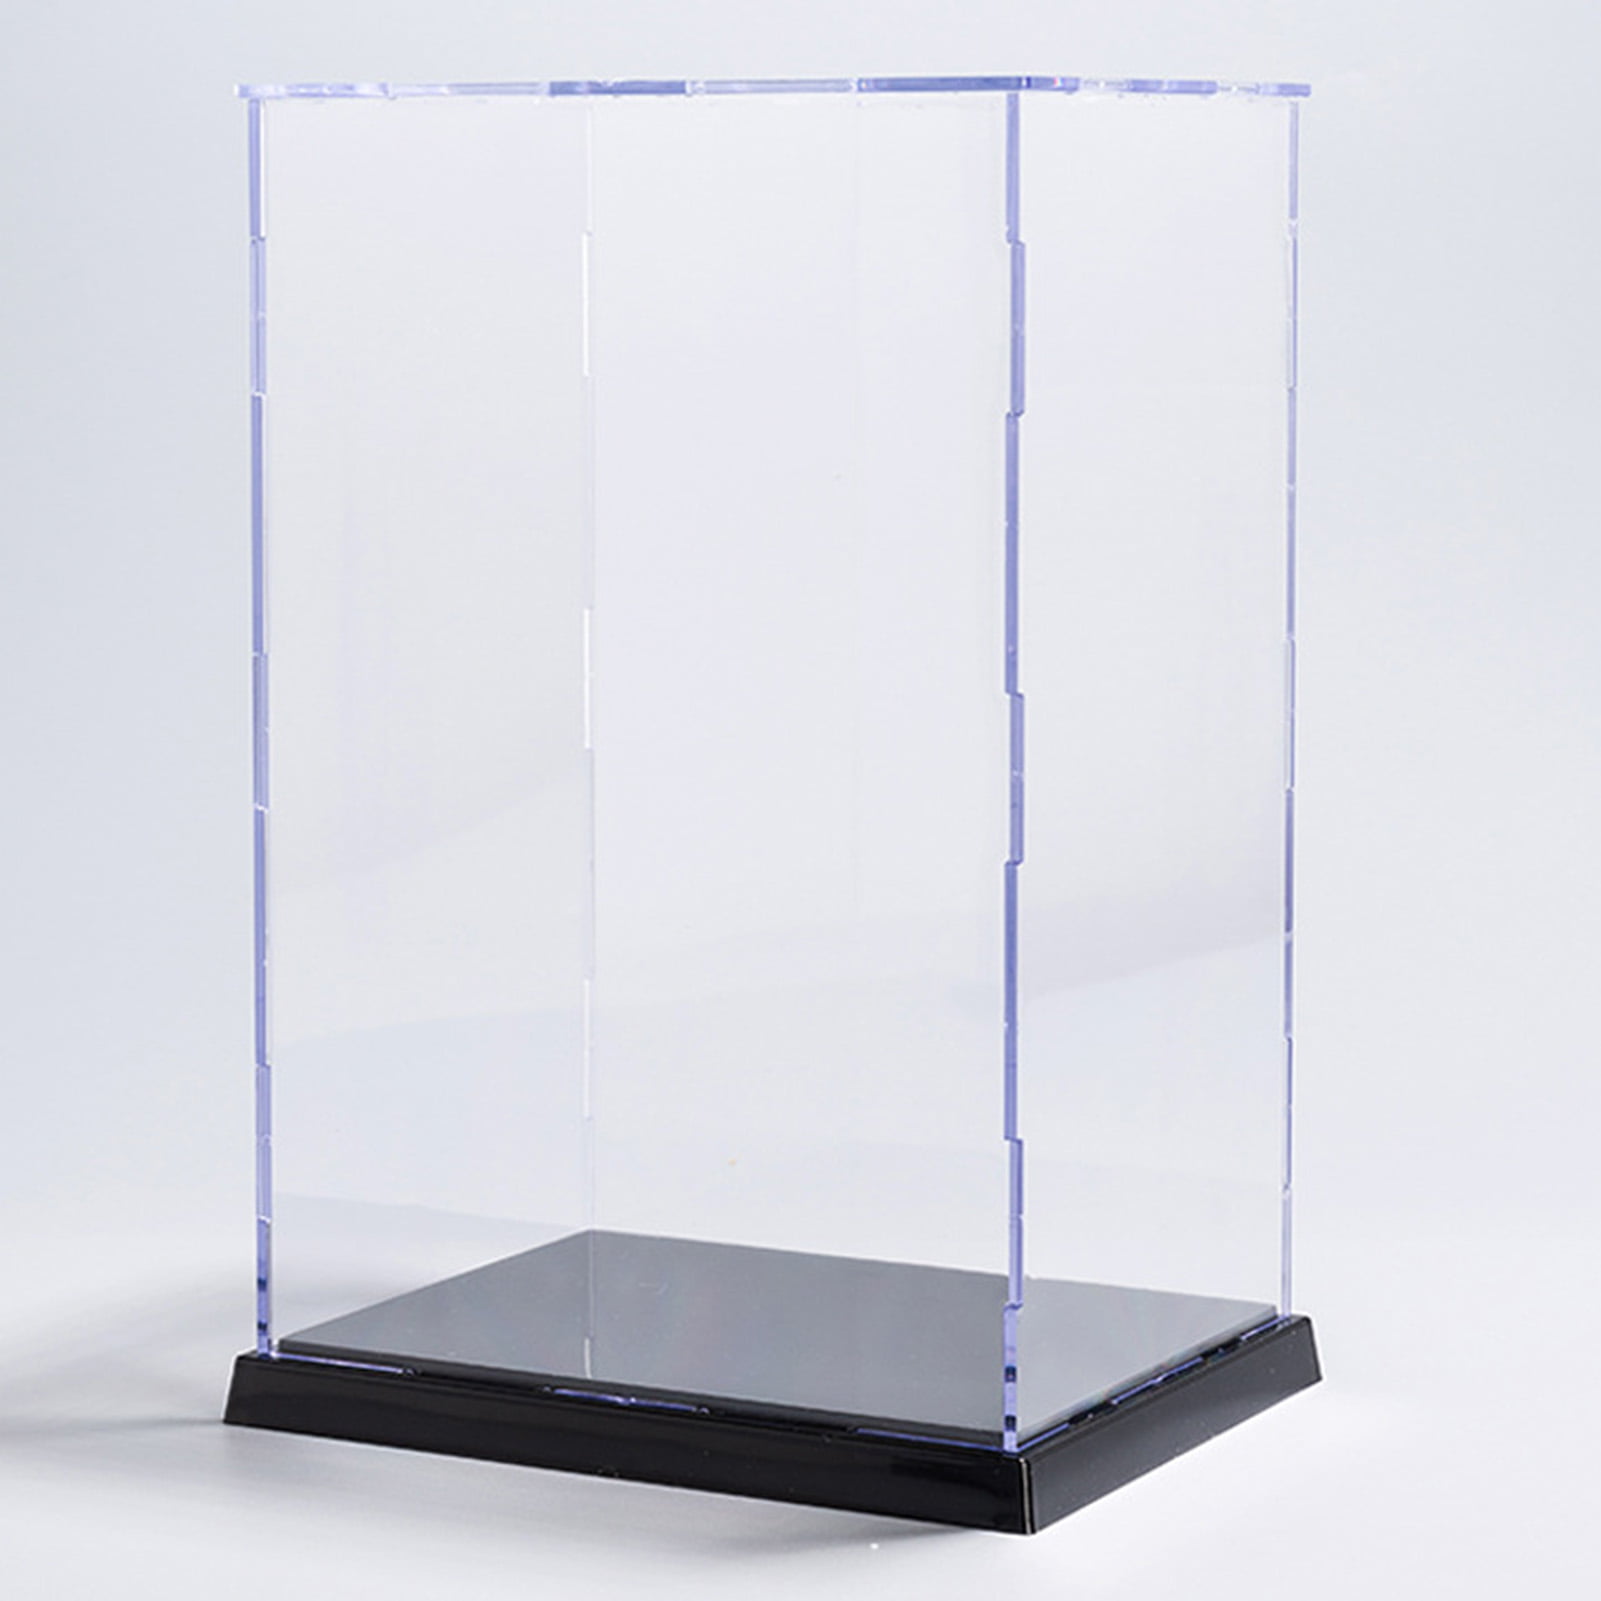 Self-Assembly Acrylic Display Case,Cube Acrylic Box for Display,Versatile Acrylic Display Case,Display case for Collectibles Toys Home Organization,Memorabilia